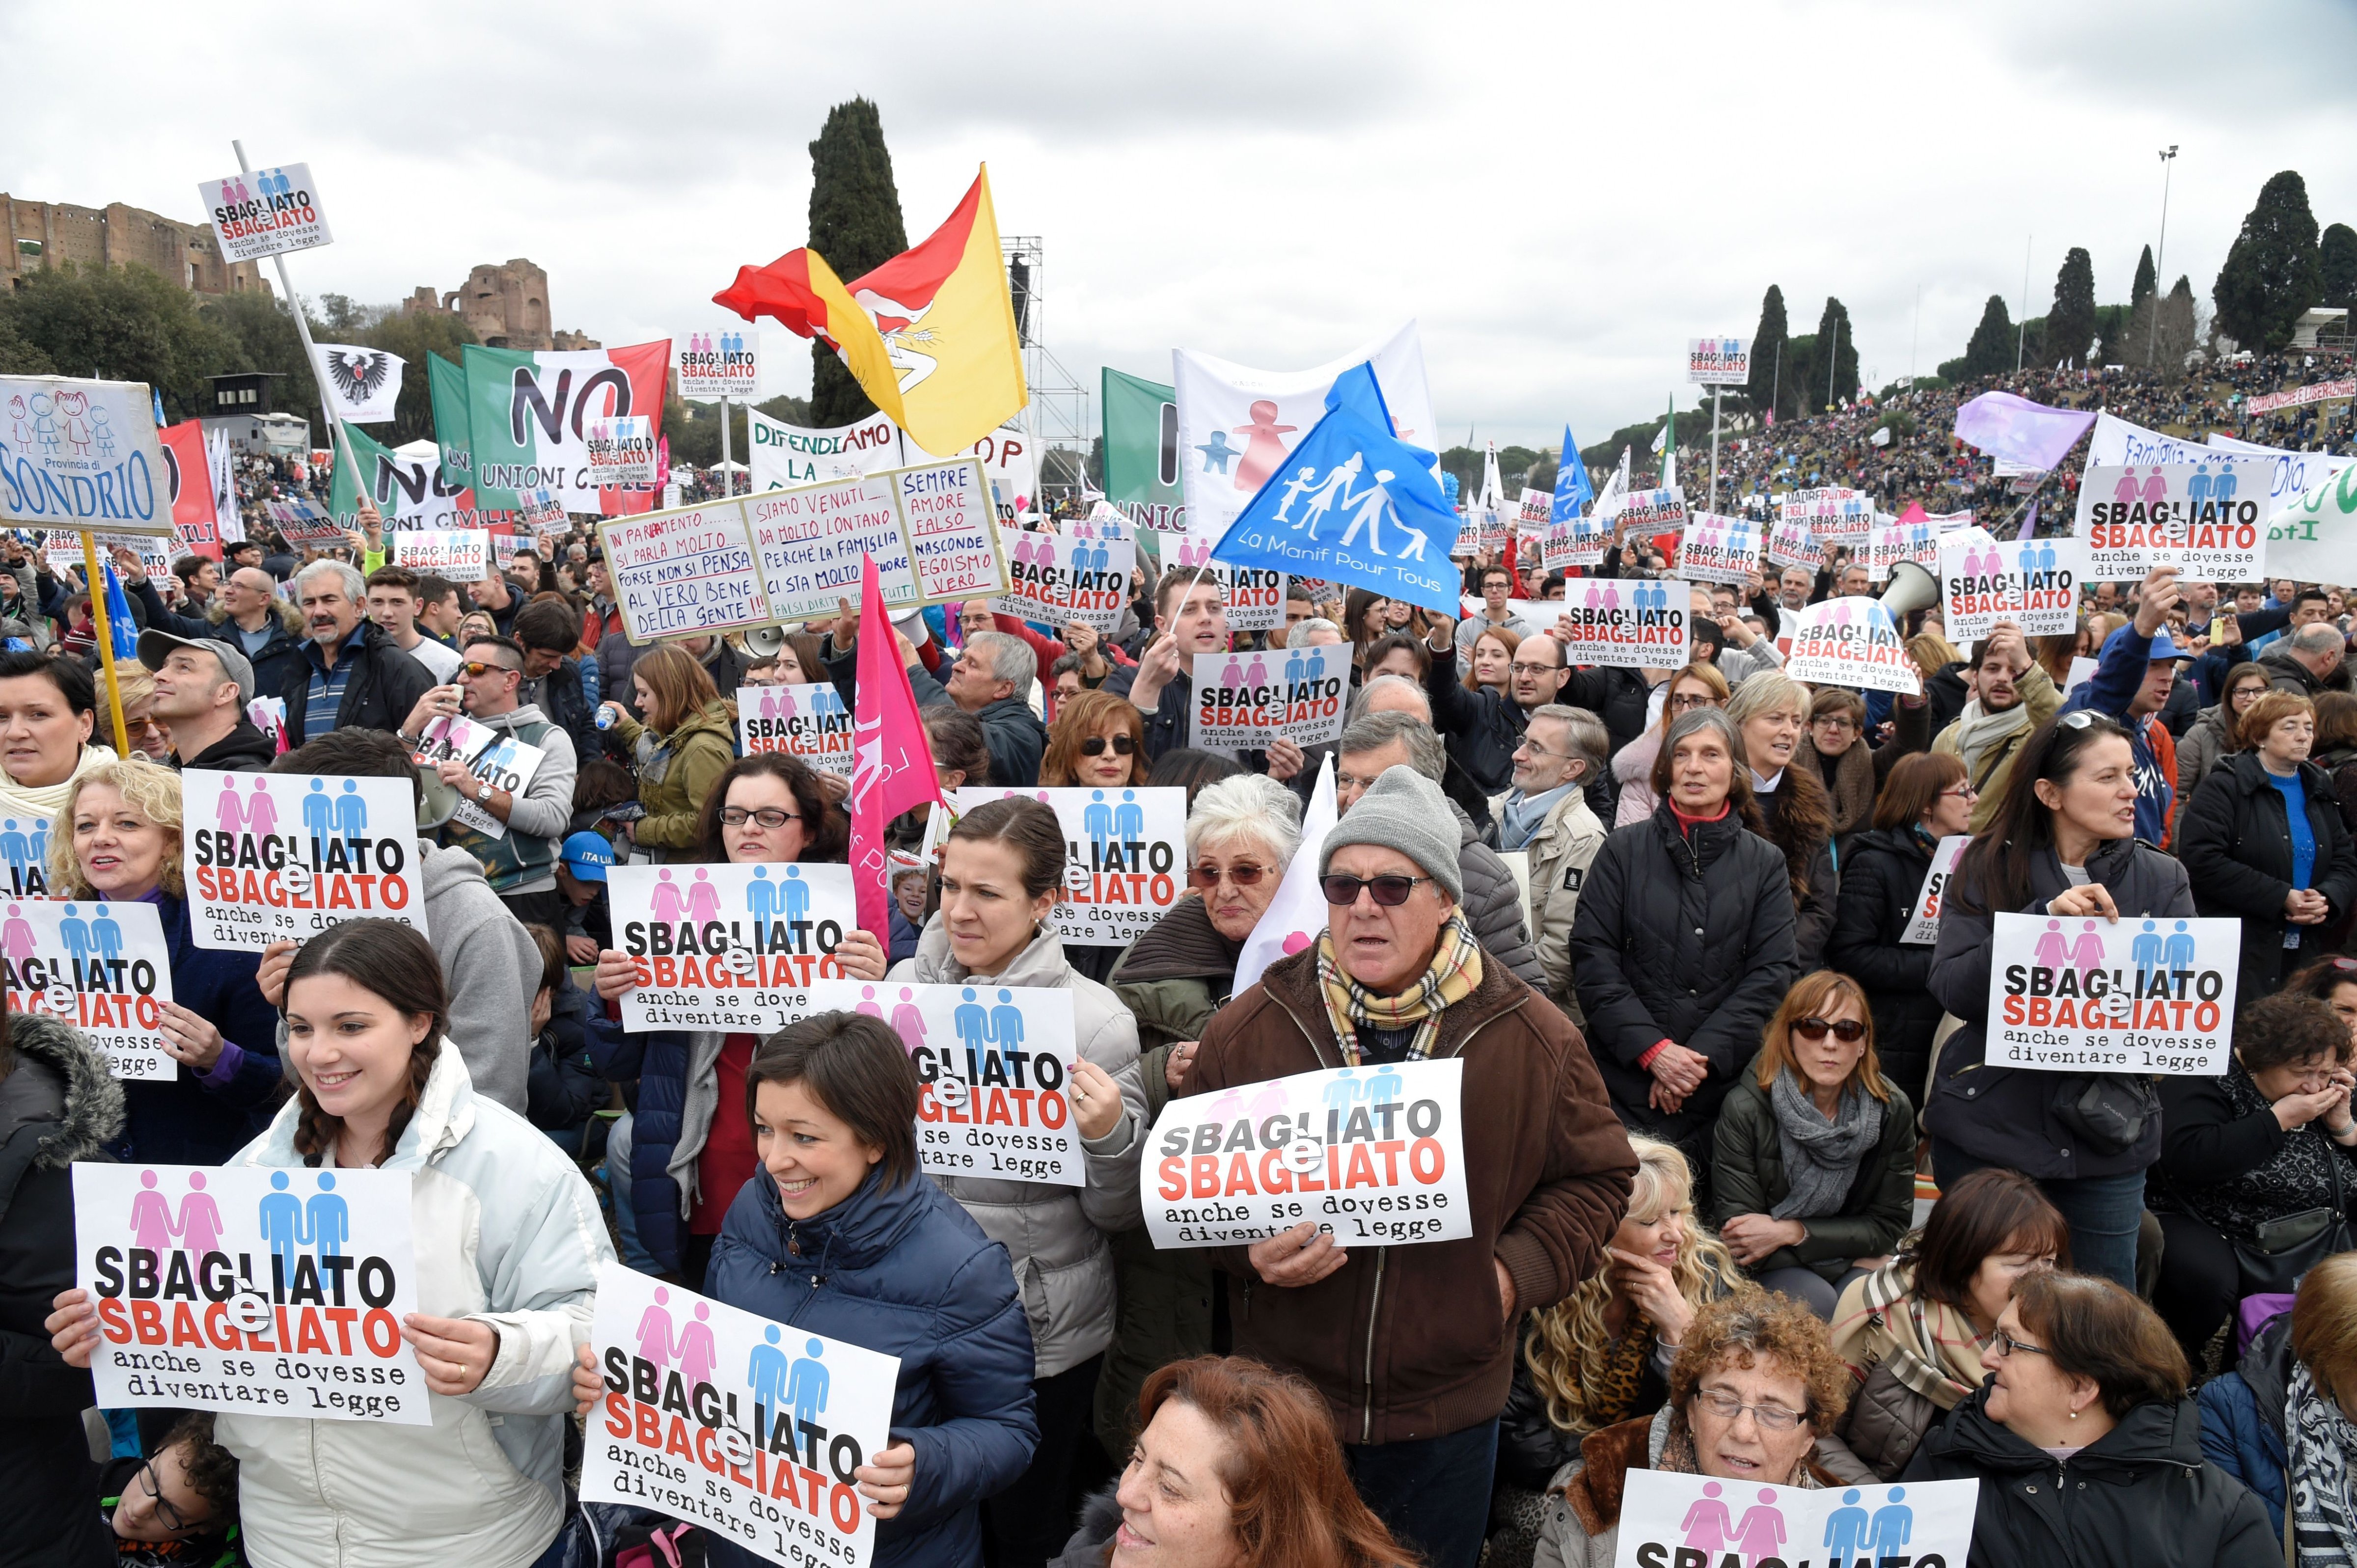 Thousands of demonstrators holding placards reading "wrong and wrong" take part in the Family Day rally at the Circo Massimo in central Rome, on Jan. 30, 2016. (Aandreas Solaro—AFP/Getty Images)